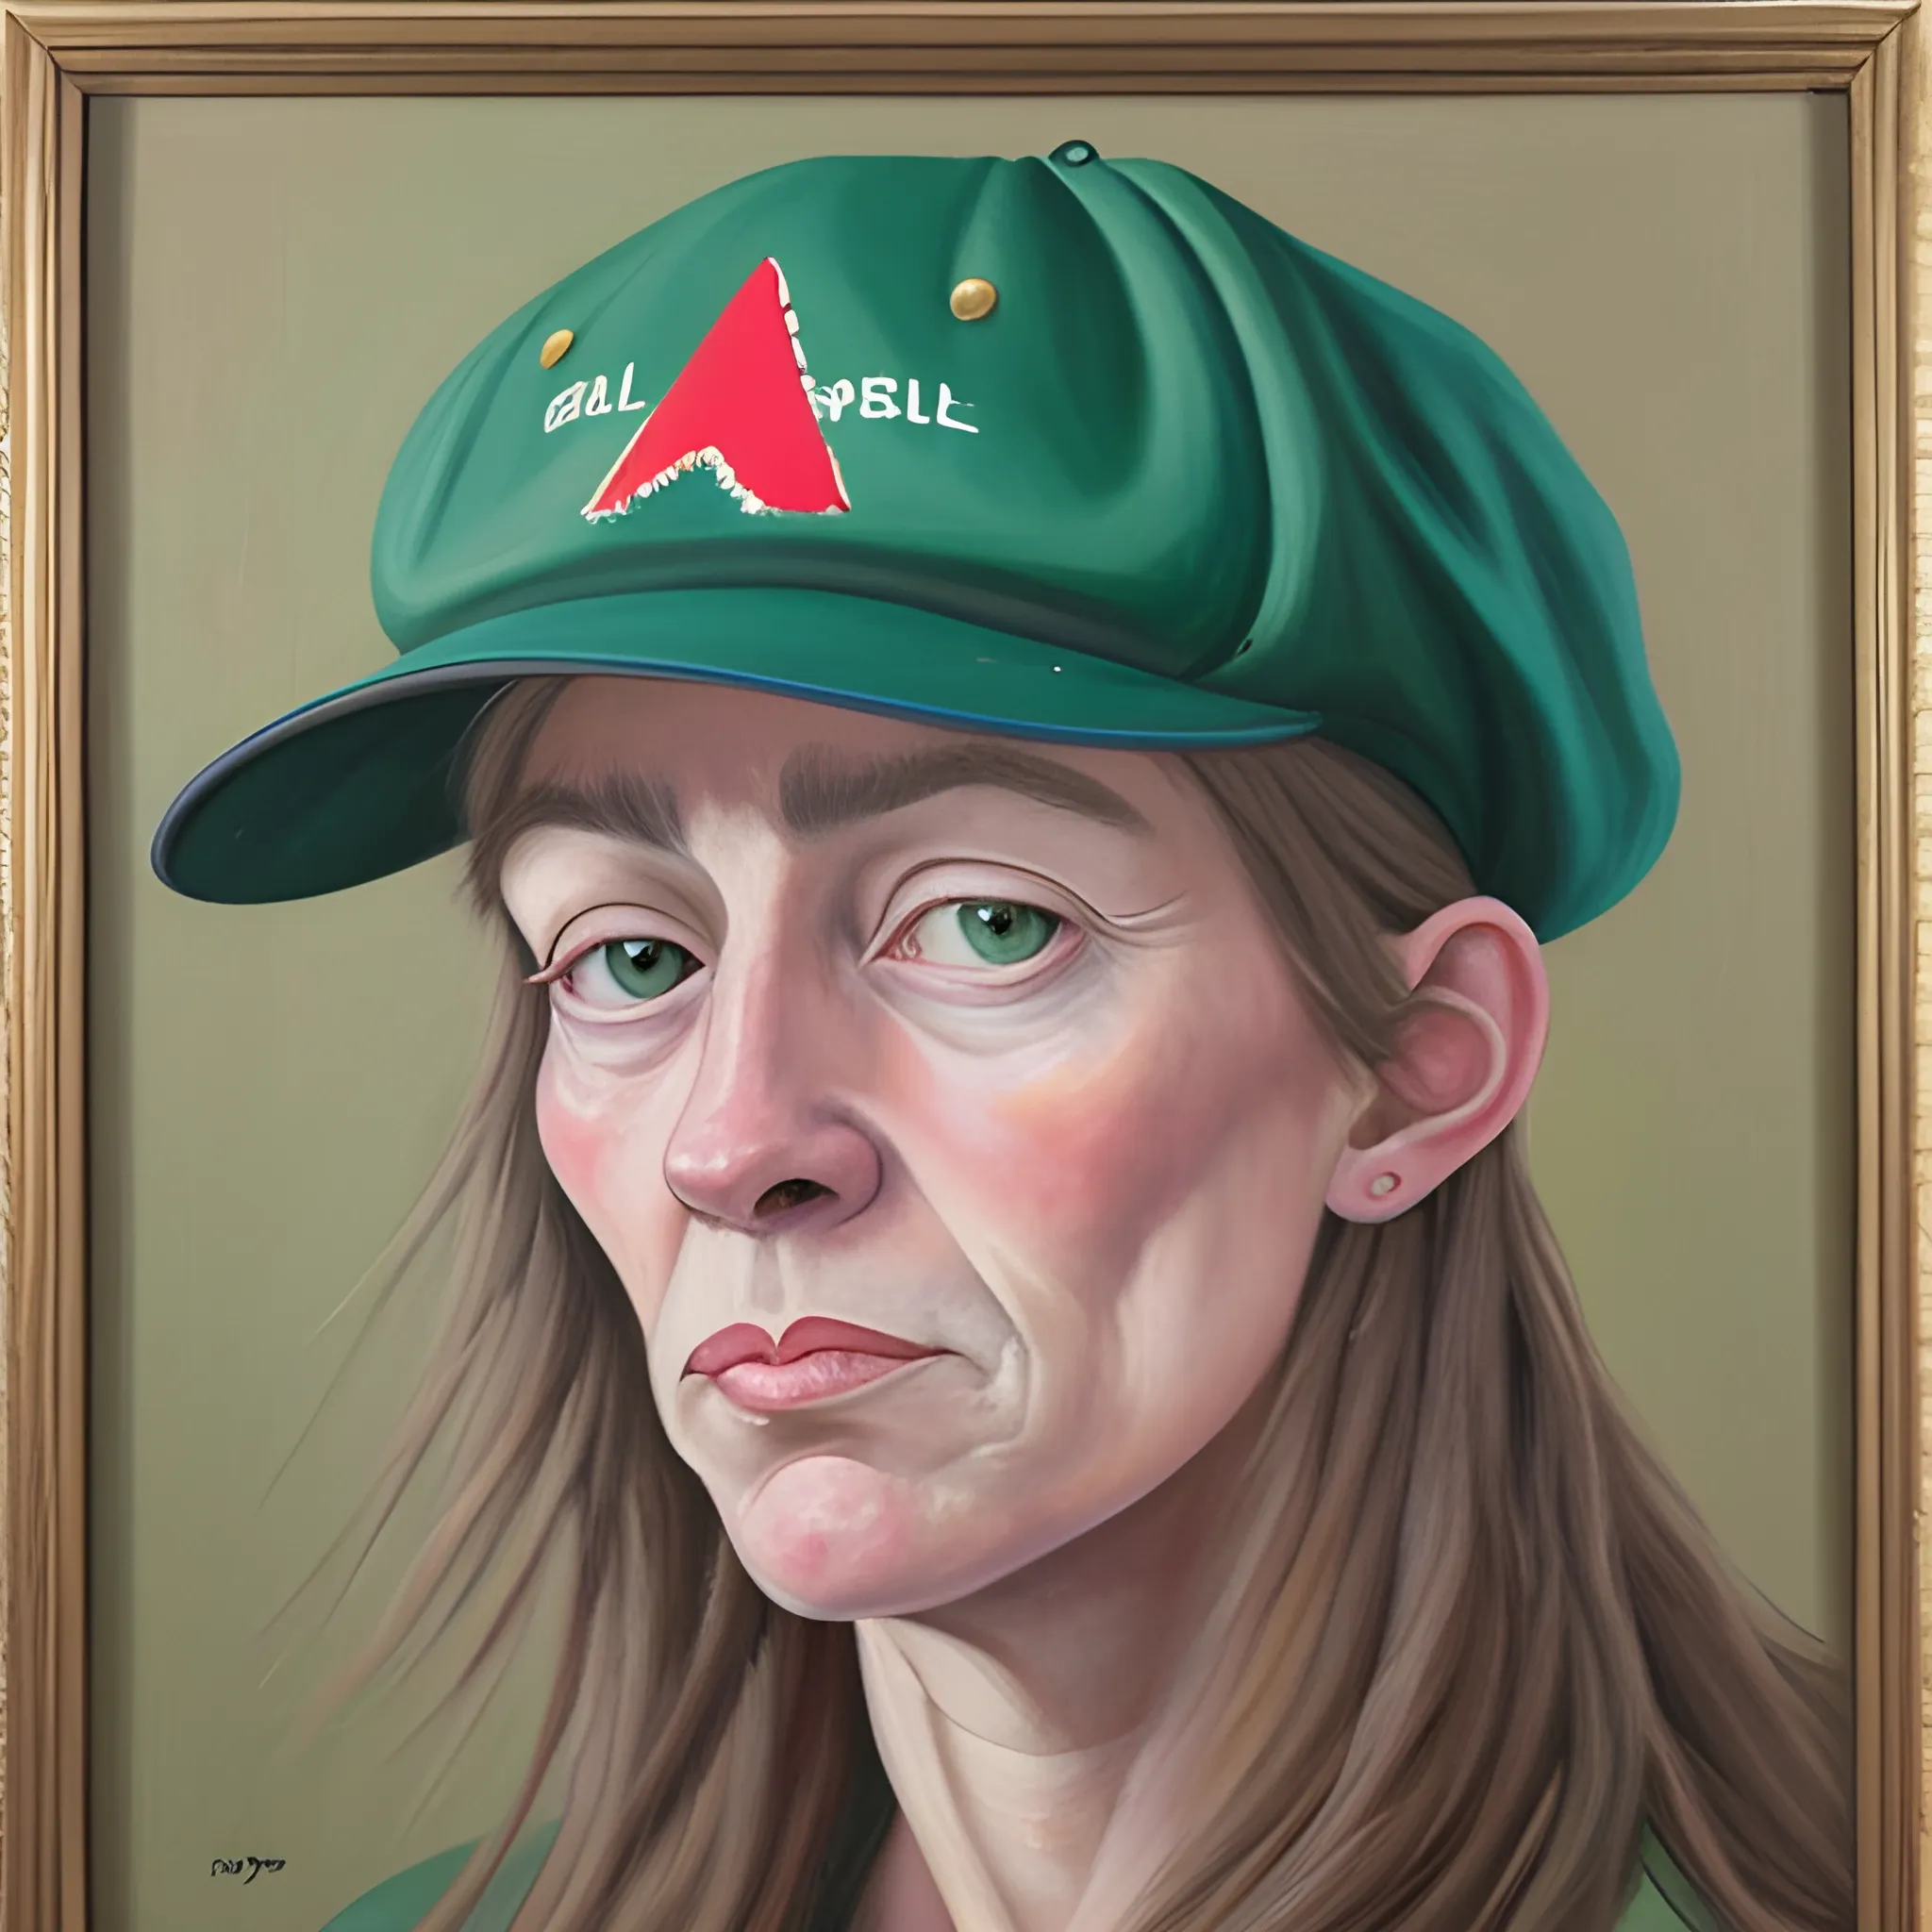  Oil Painting,
marjorie taylor green, ugly, dyke, maga hat 
